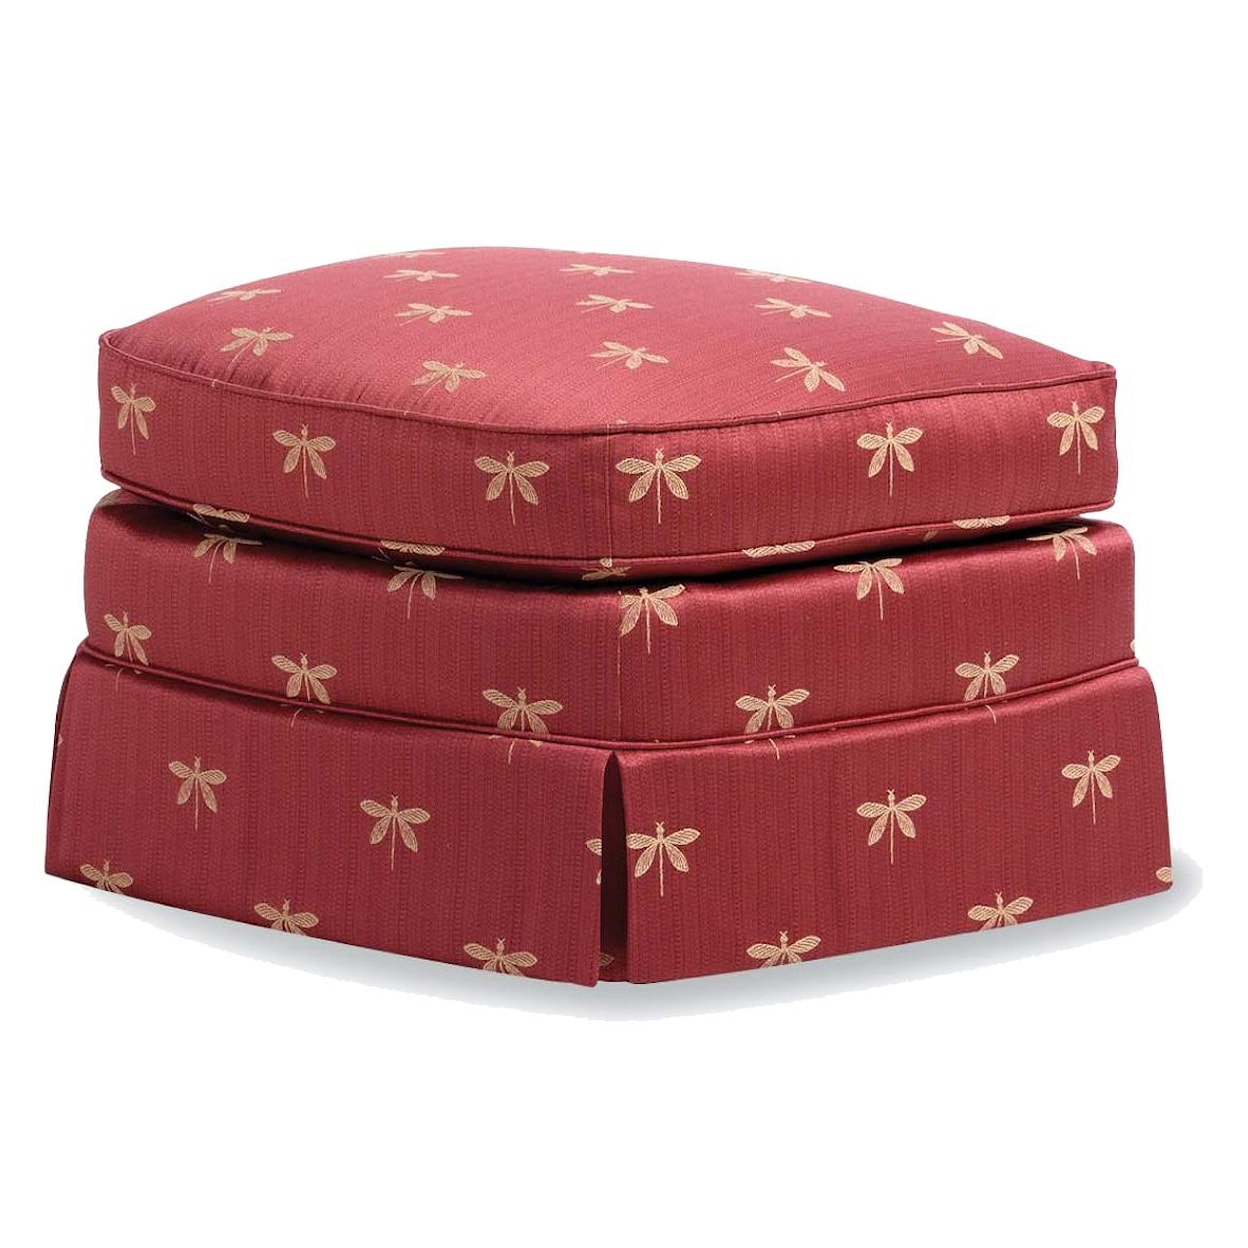 Jessica Charles Fine Upholstered Accents Ottoman   